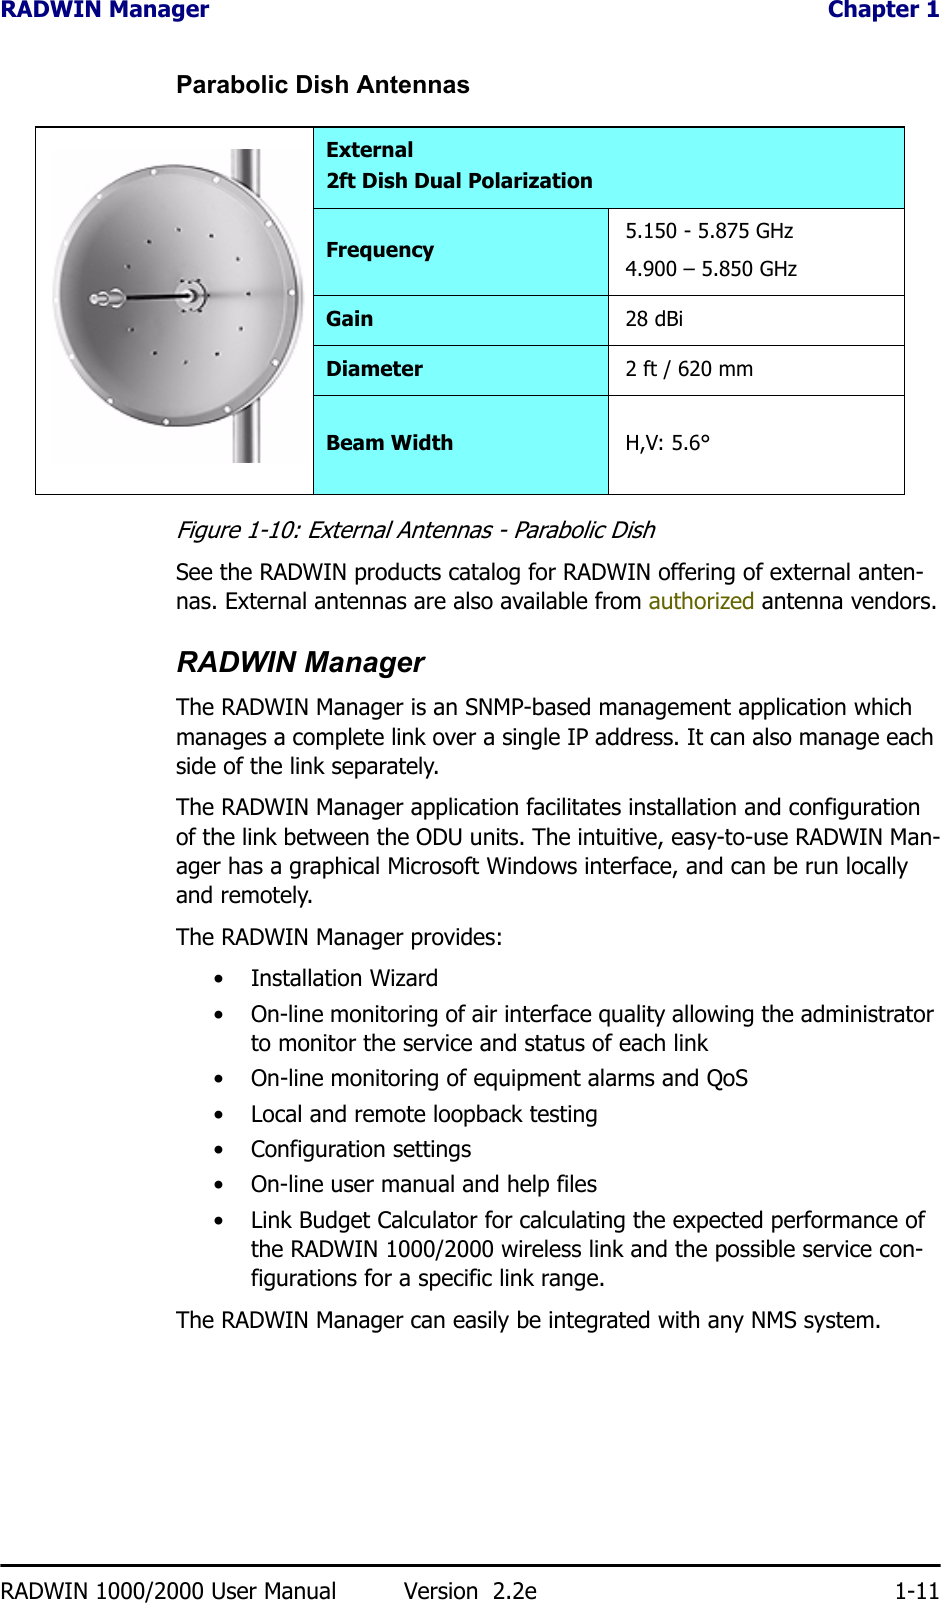 RADWIN Manager  Chapter 1RADWIN 1000/2000 User Manual Version  2.2e 1-11Parabolic Dish AntennasFigure 1-10: External Antennas - Parabolic DishSee the RADWIN products catalog for RADWIN offering of external anten-nas. External antennas are also available from authorized antenna vendors.RADWIN ManagerThe RADWIN Manager is an SNMP-based management application which manages a complete link over a single IP address. It can also manage each side of the link separately.The RADWIN Manager application facilitates installation and configuration of the link between the ODU units. The intuitive, easy-to-use RADWIN Man-ager has a graphical Microsoft Windows interface, and can be run locally and remotely. The RADWIN Manager provides:• Installation Wizard• On-line monitoring of air interface quality allowing the administrator to monitor the service and status of each link• On-line monitoring of equipment alarms and QoS• Local and remote loopback testing• Configuration settings• On-line user manual and help files• Link Budget Calculator for calculating the expected performance of the RADWIN 1000/2000 wireless link and the possible service con-figurations for a specific link range.The RADWIN Manager can easily be integrated with any NMS system.External2ft Dish Dual PolarizationFrequency 5.150 - 5.875 GHz4.900 – 5.850 GHzGain 28 dBiDiameter 2 ft / 620 mmBeam Width H,V: 5.6°